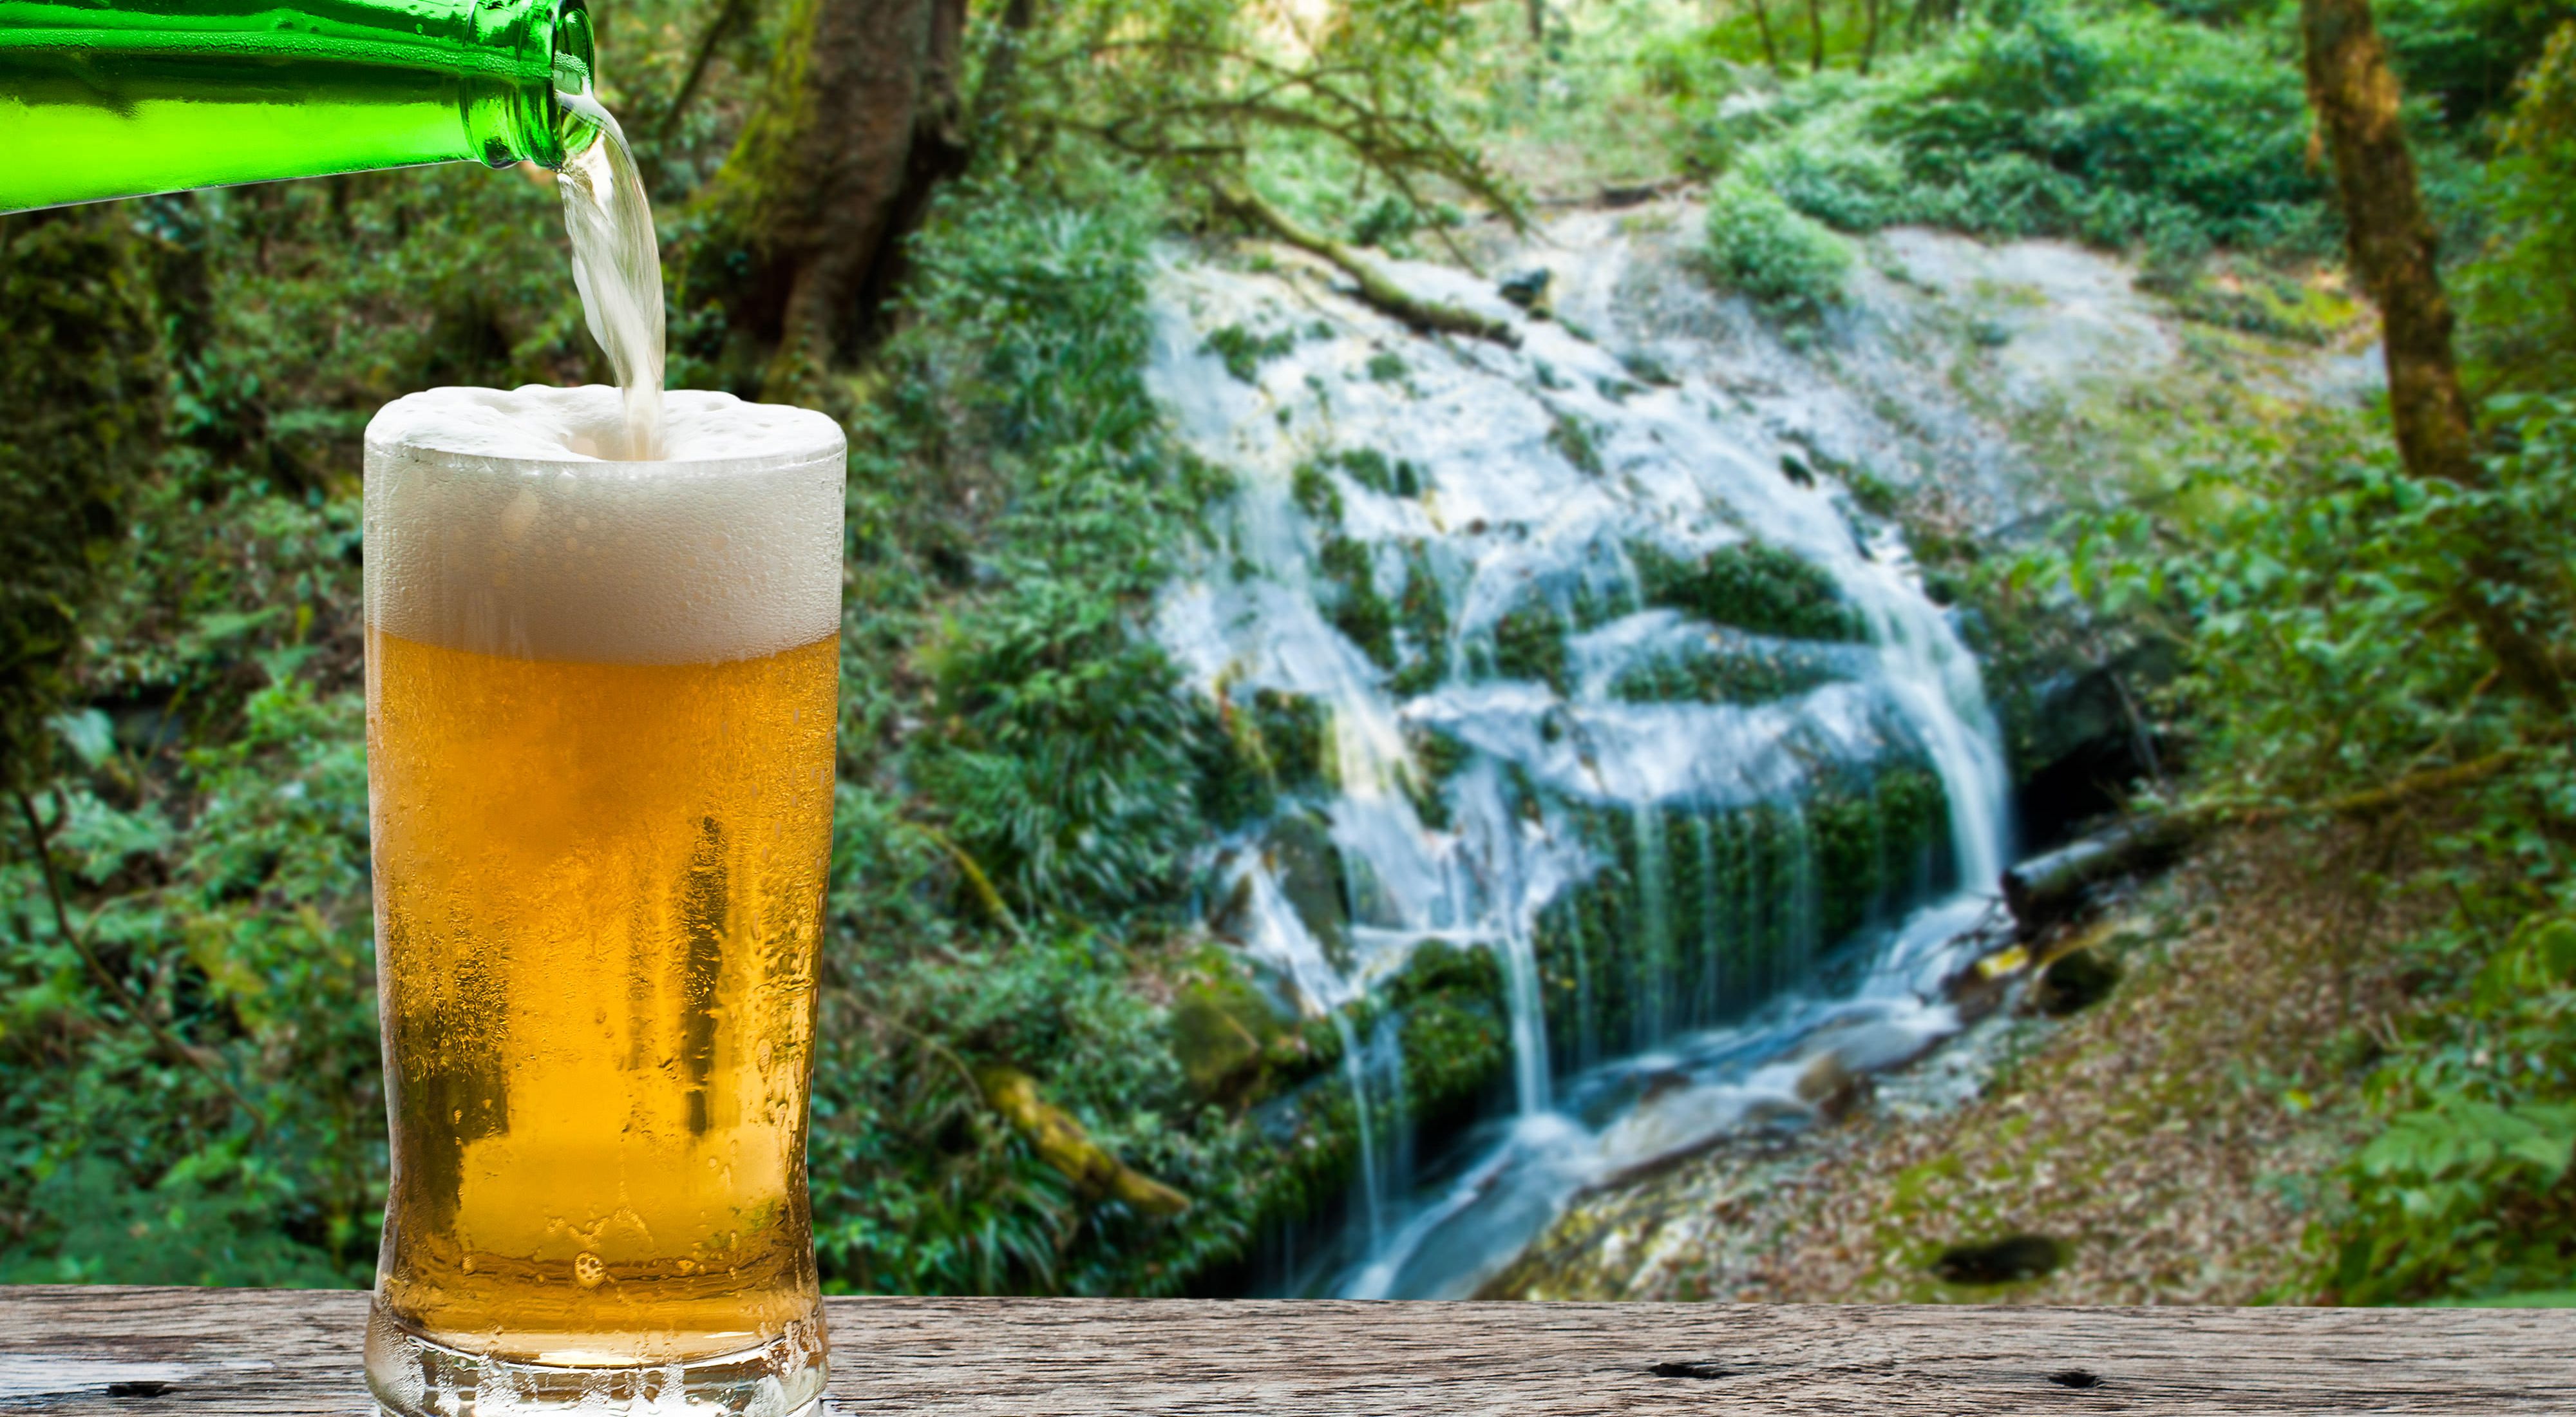 If you like beer, you should love forests.